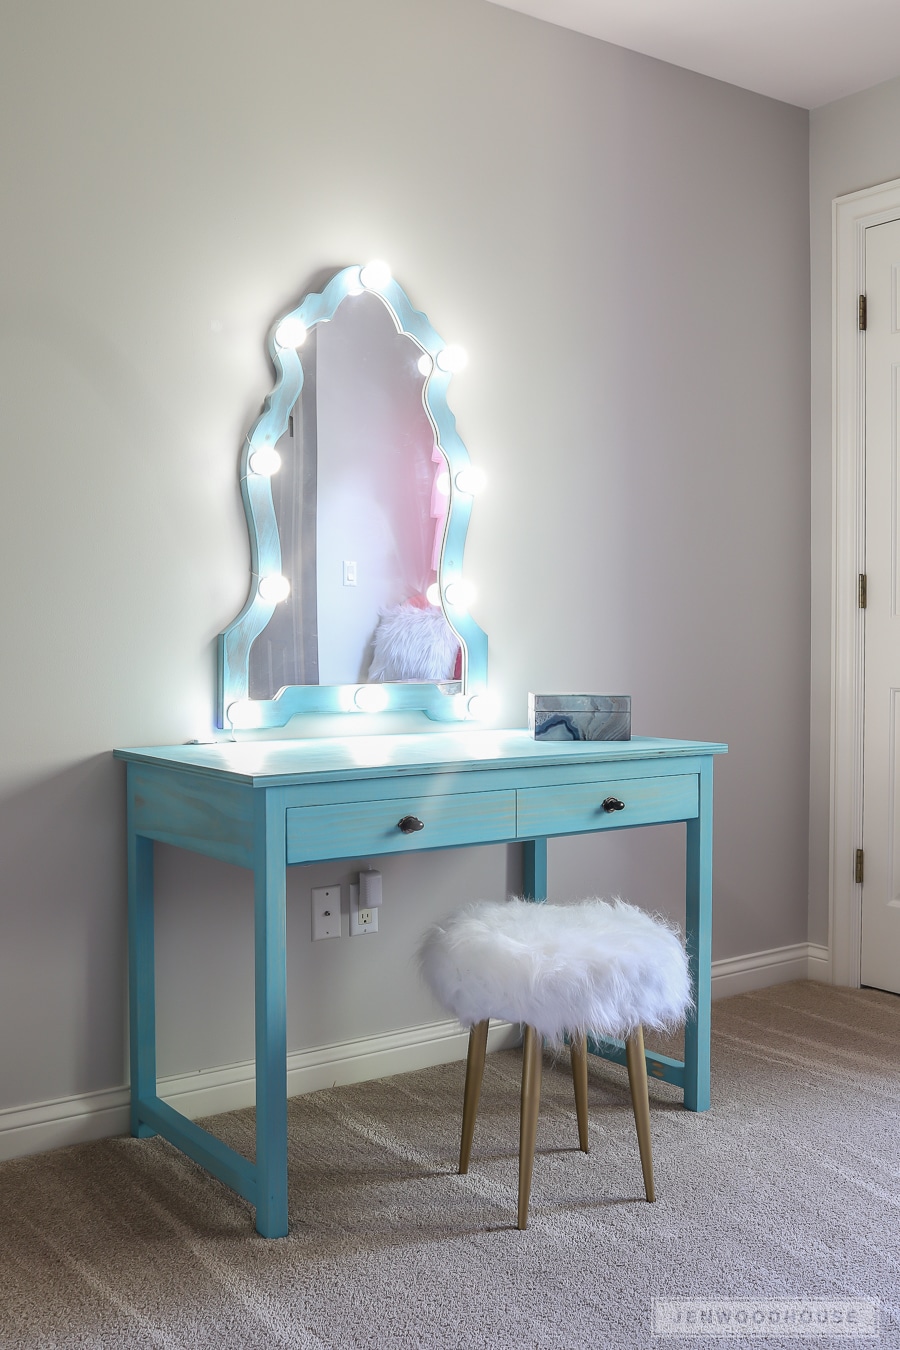 How To Build A Diy Makeup Vanity With, How To Make A Small Vanity Table